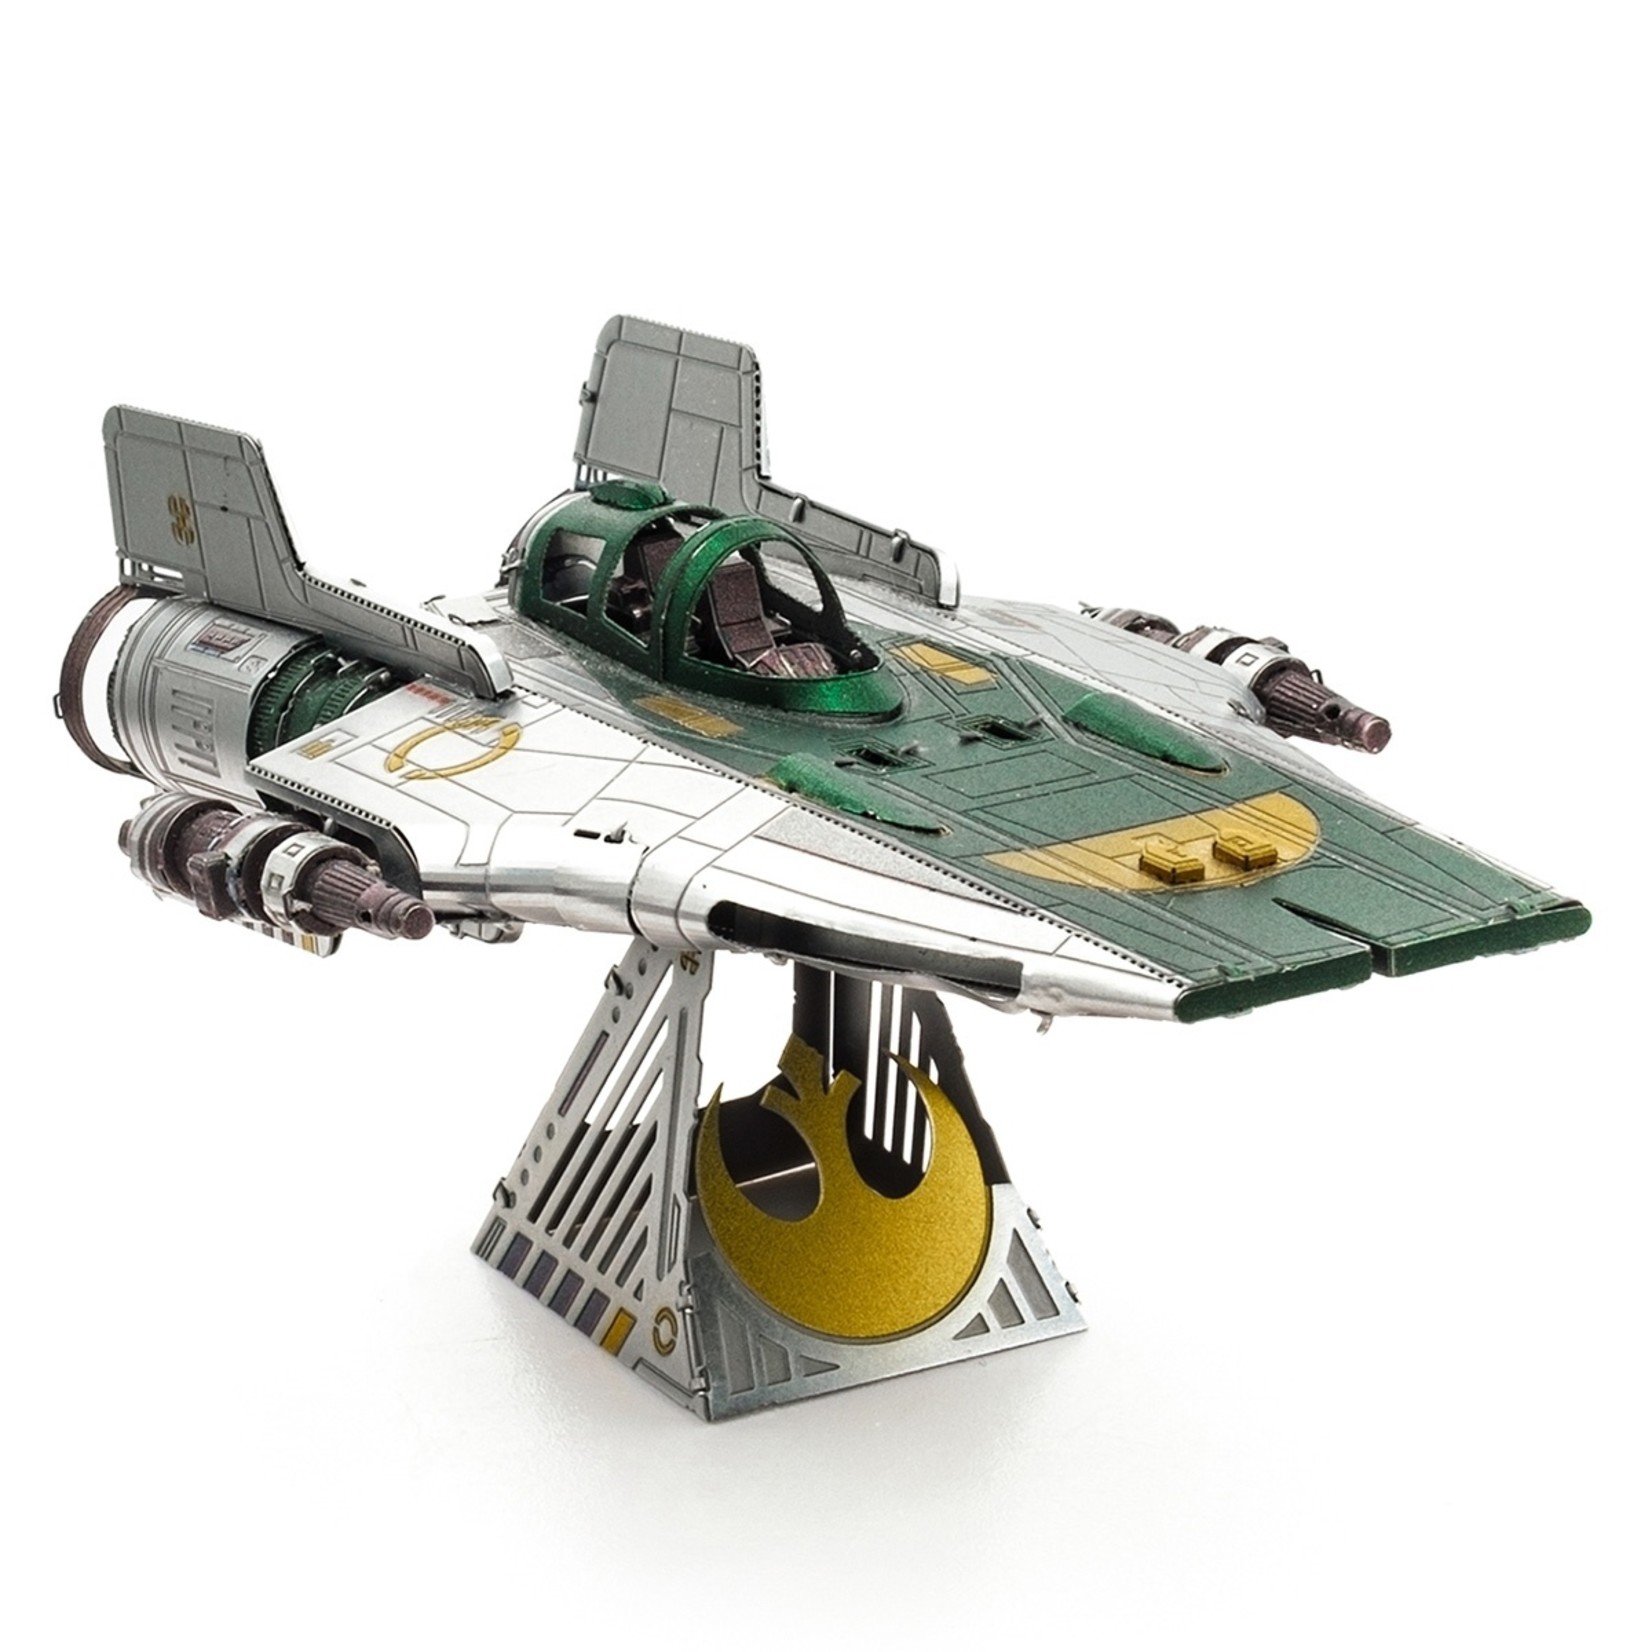 Metal Earth Metal Earth - Star Wars : Resistance A-Wing Fighter